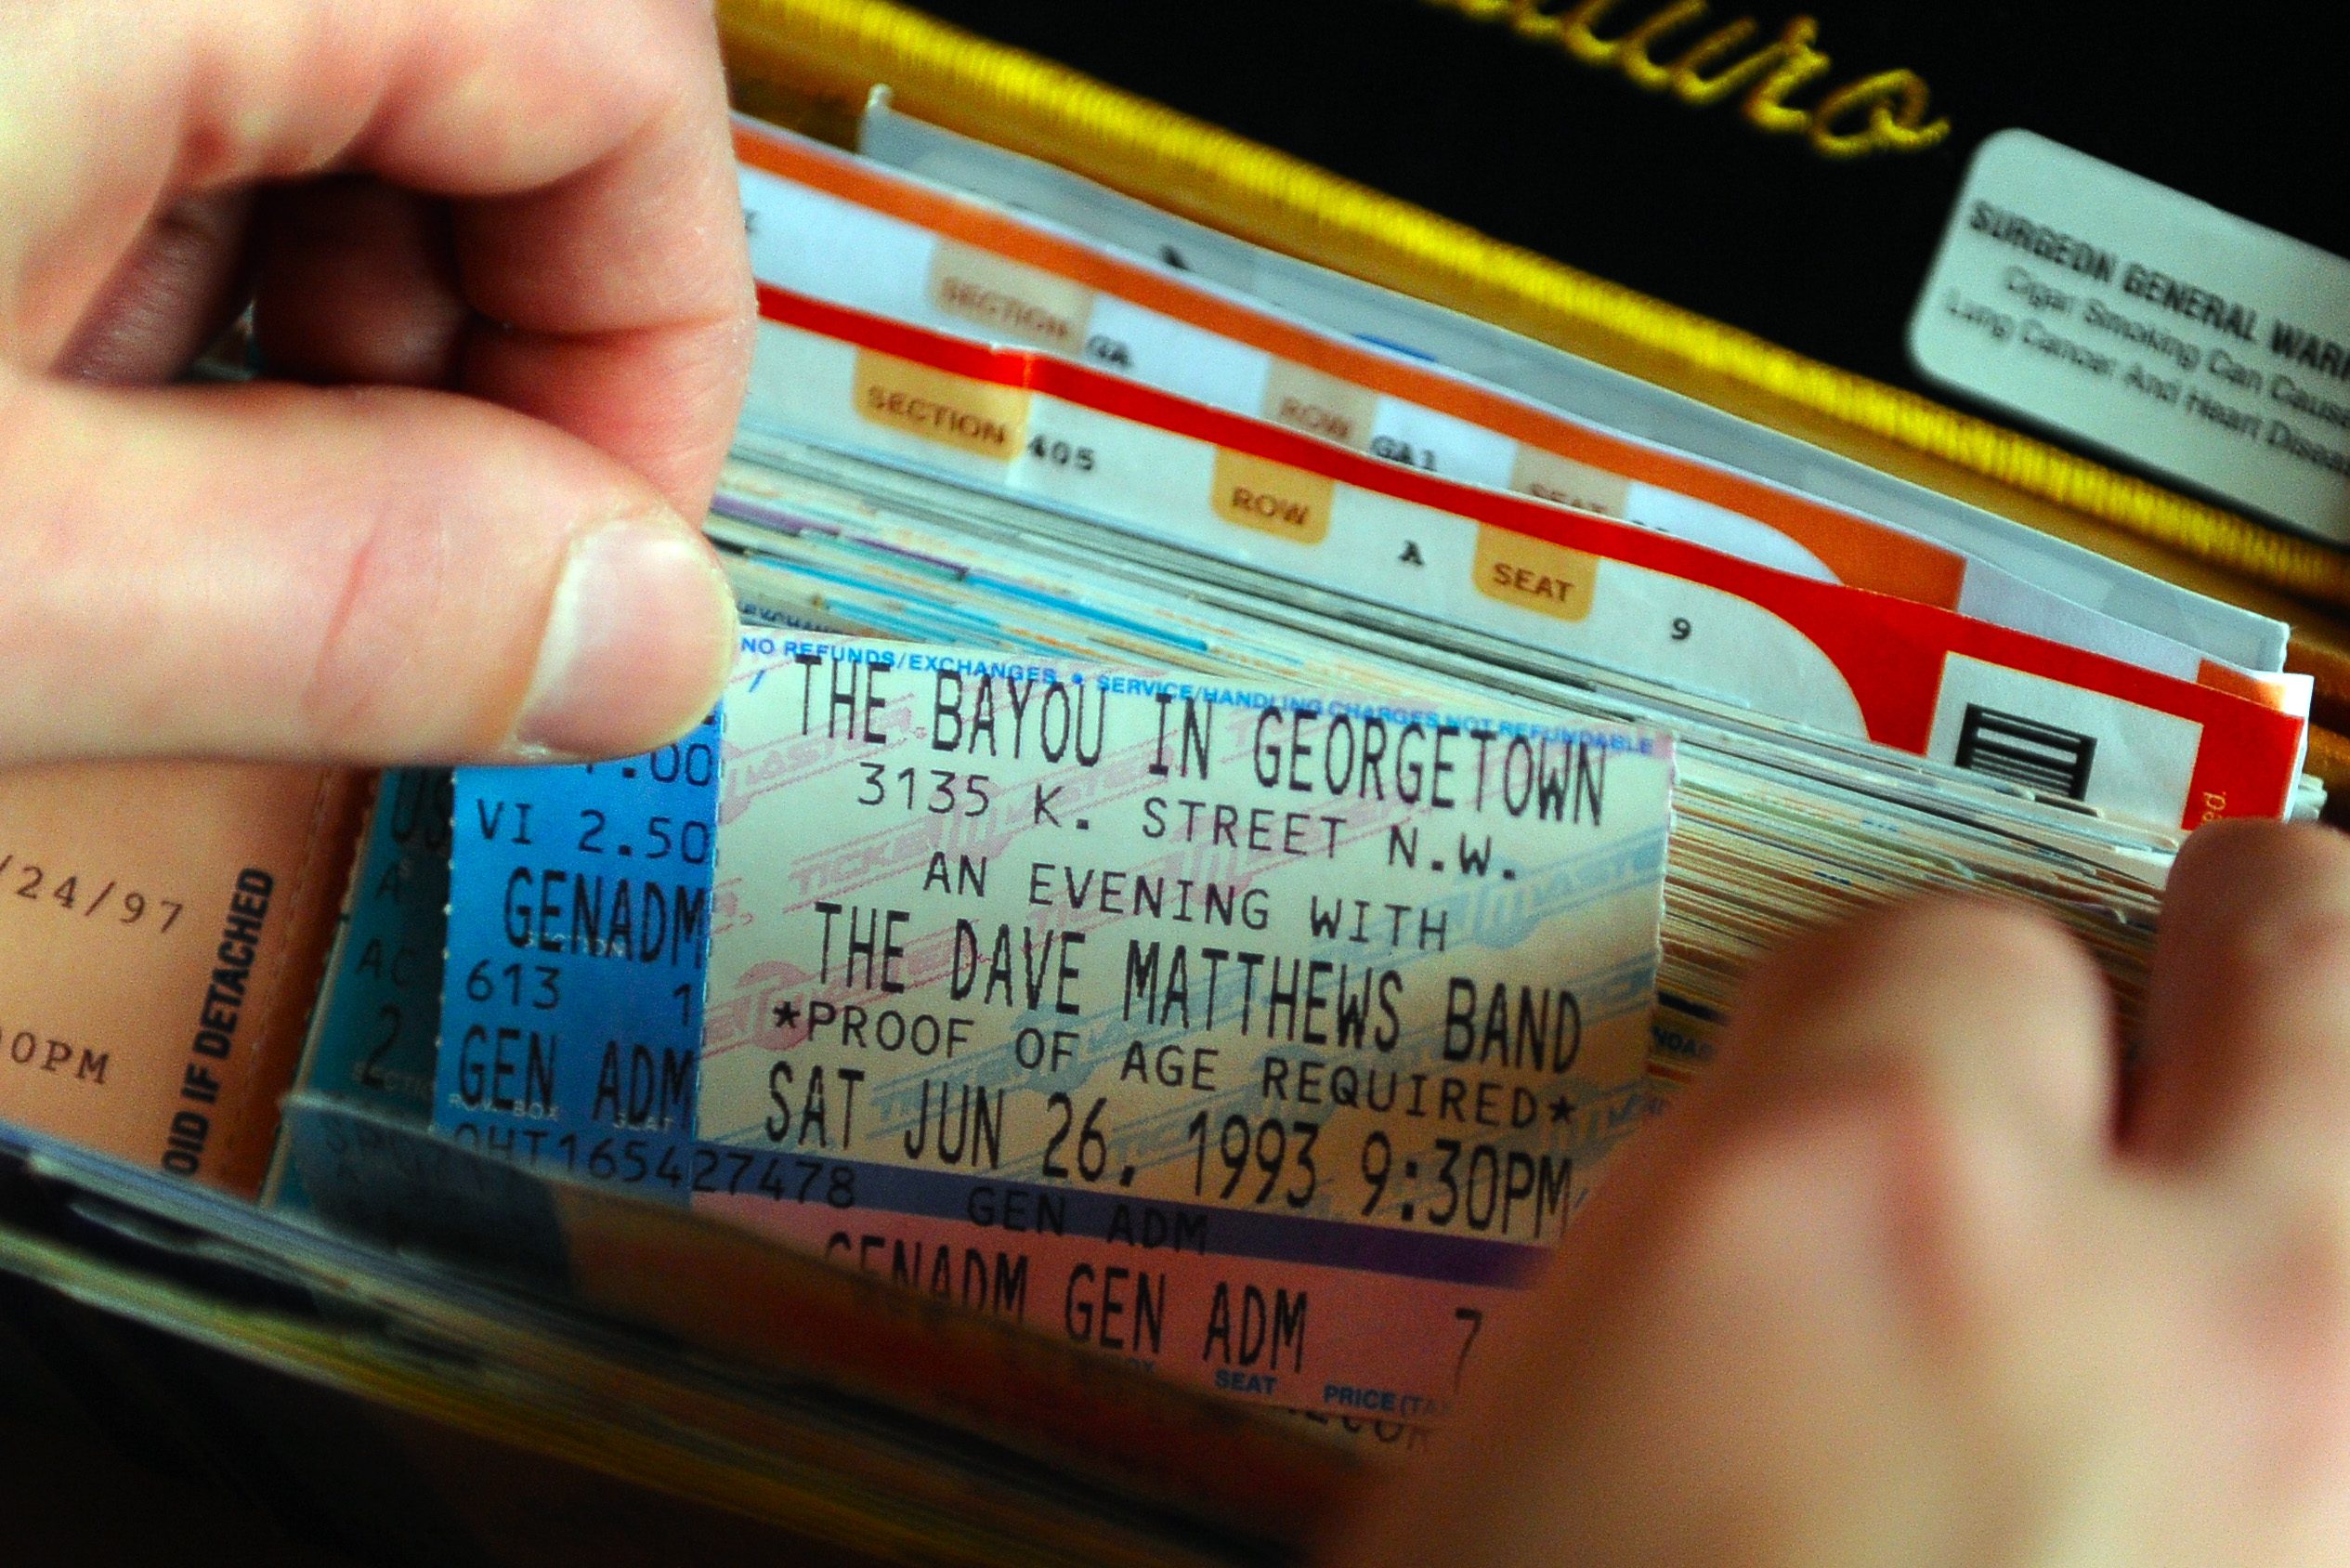 A collection of old concert tickets, including a Dave Matthews Band ticket from 1993